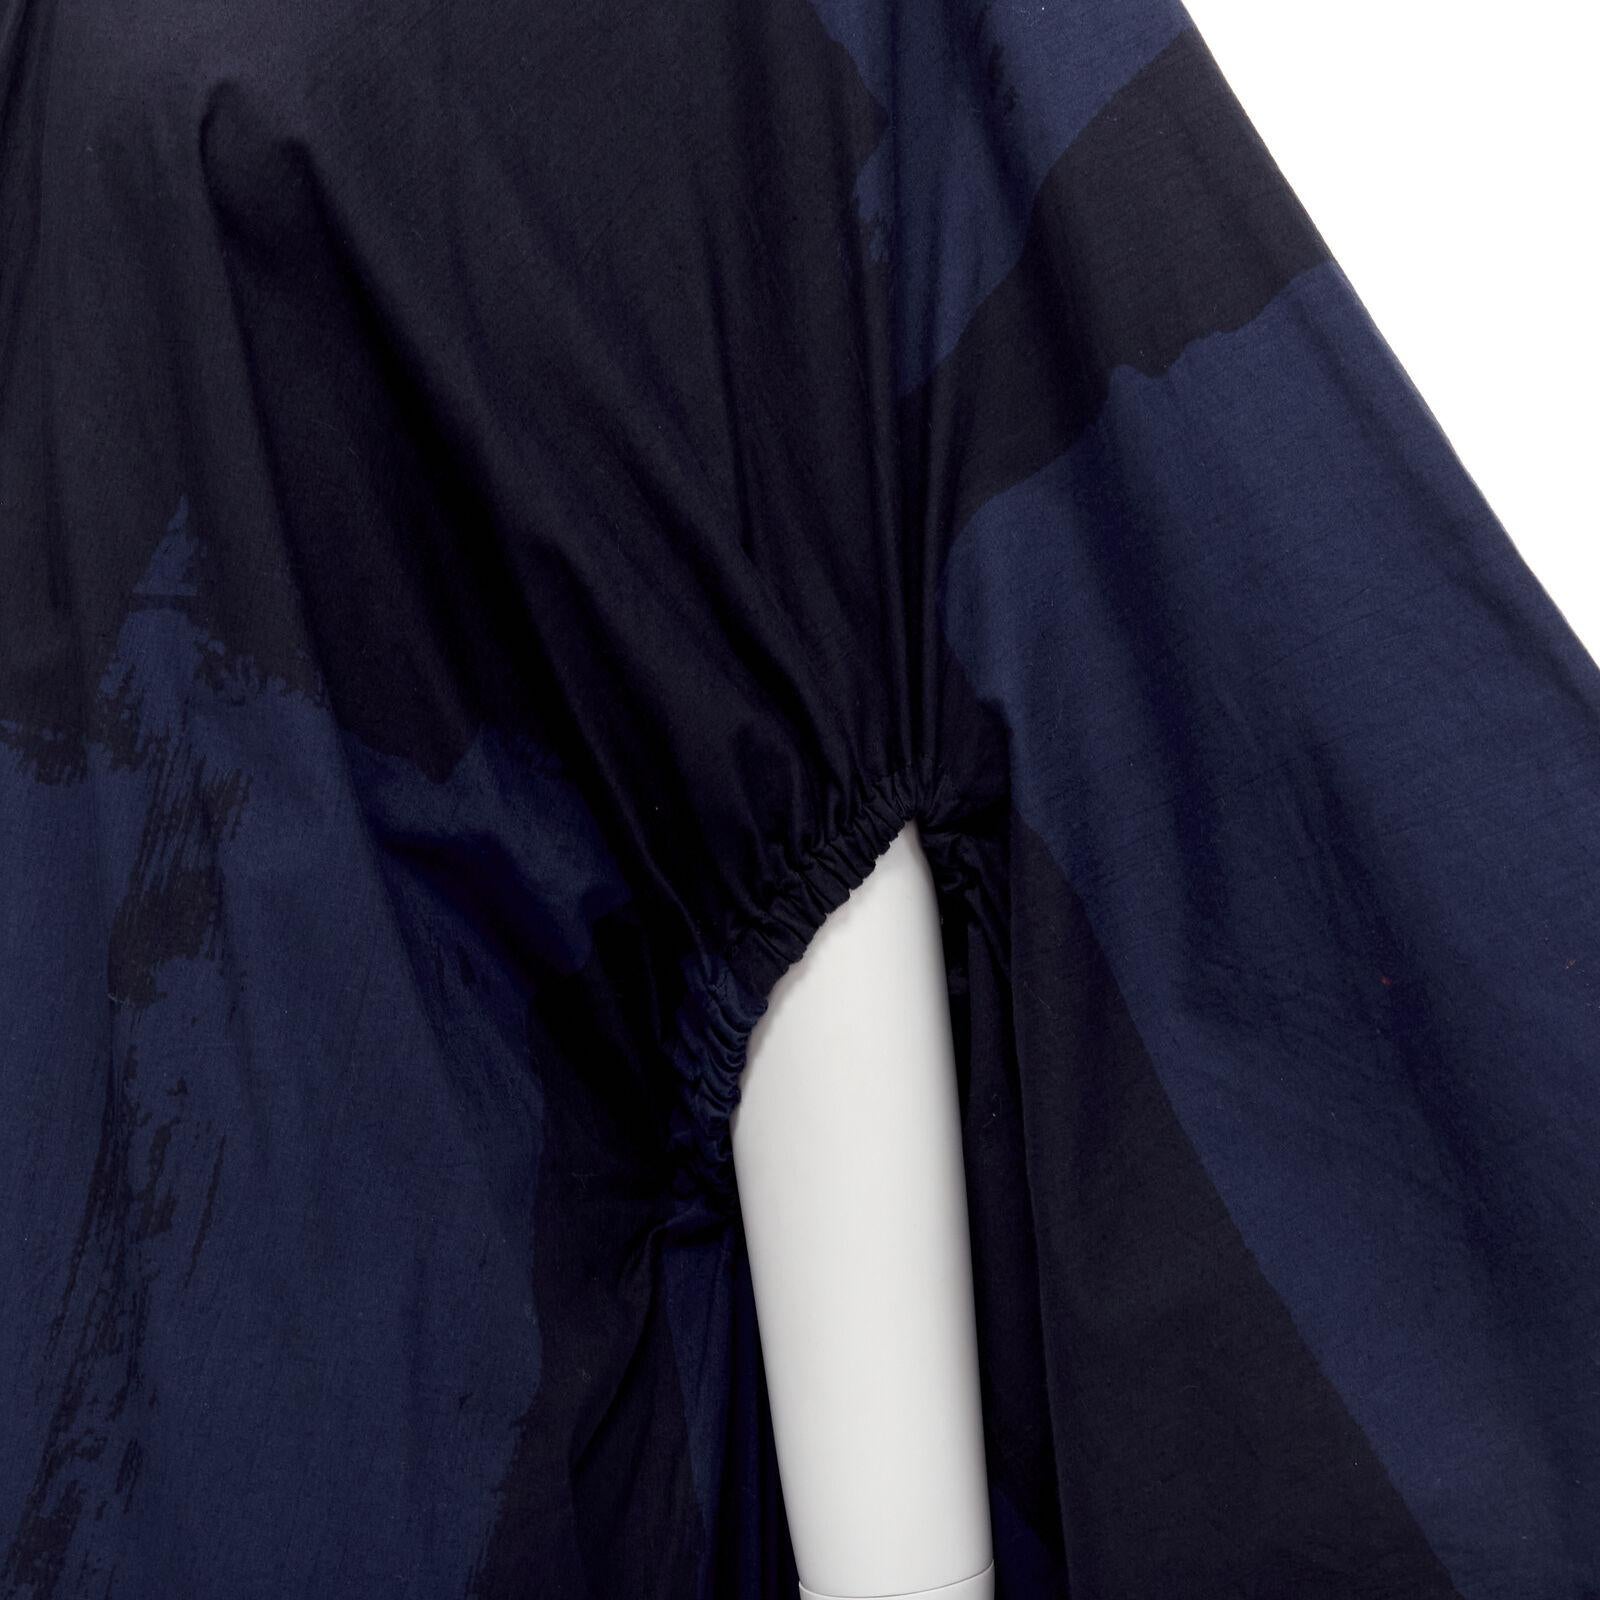 rare COMME DES GARCONS Vintage 1980's blue brushstroke angular trapeze dress
Reference: CRTI/A00696
Brand: Comme Des Garcons
Designer: Rei Kawakubo
Collection: 1980s
Material: Feels like cotton
Color: Navy, Black
Pattern: Abstract
Closure: